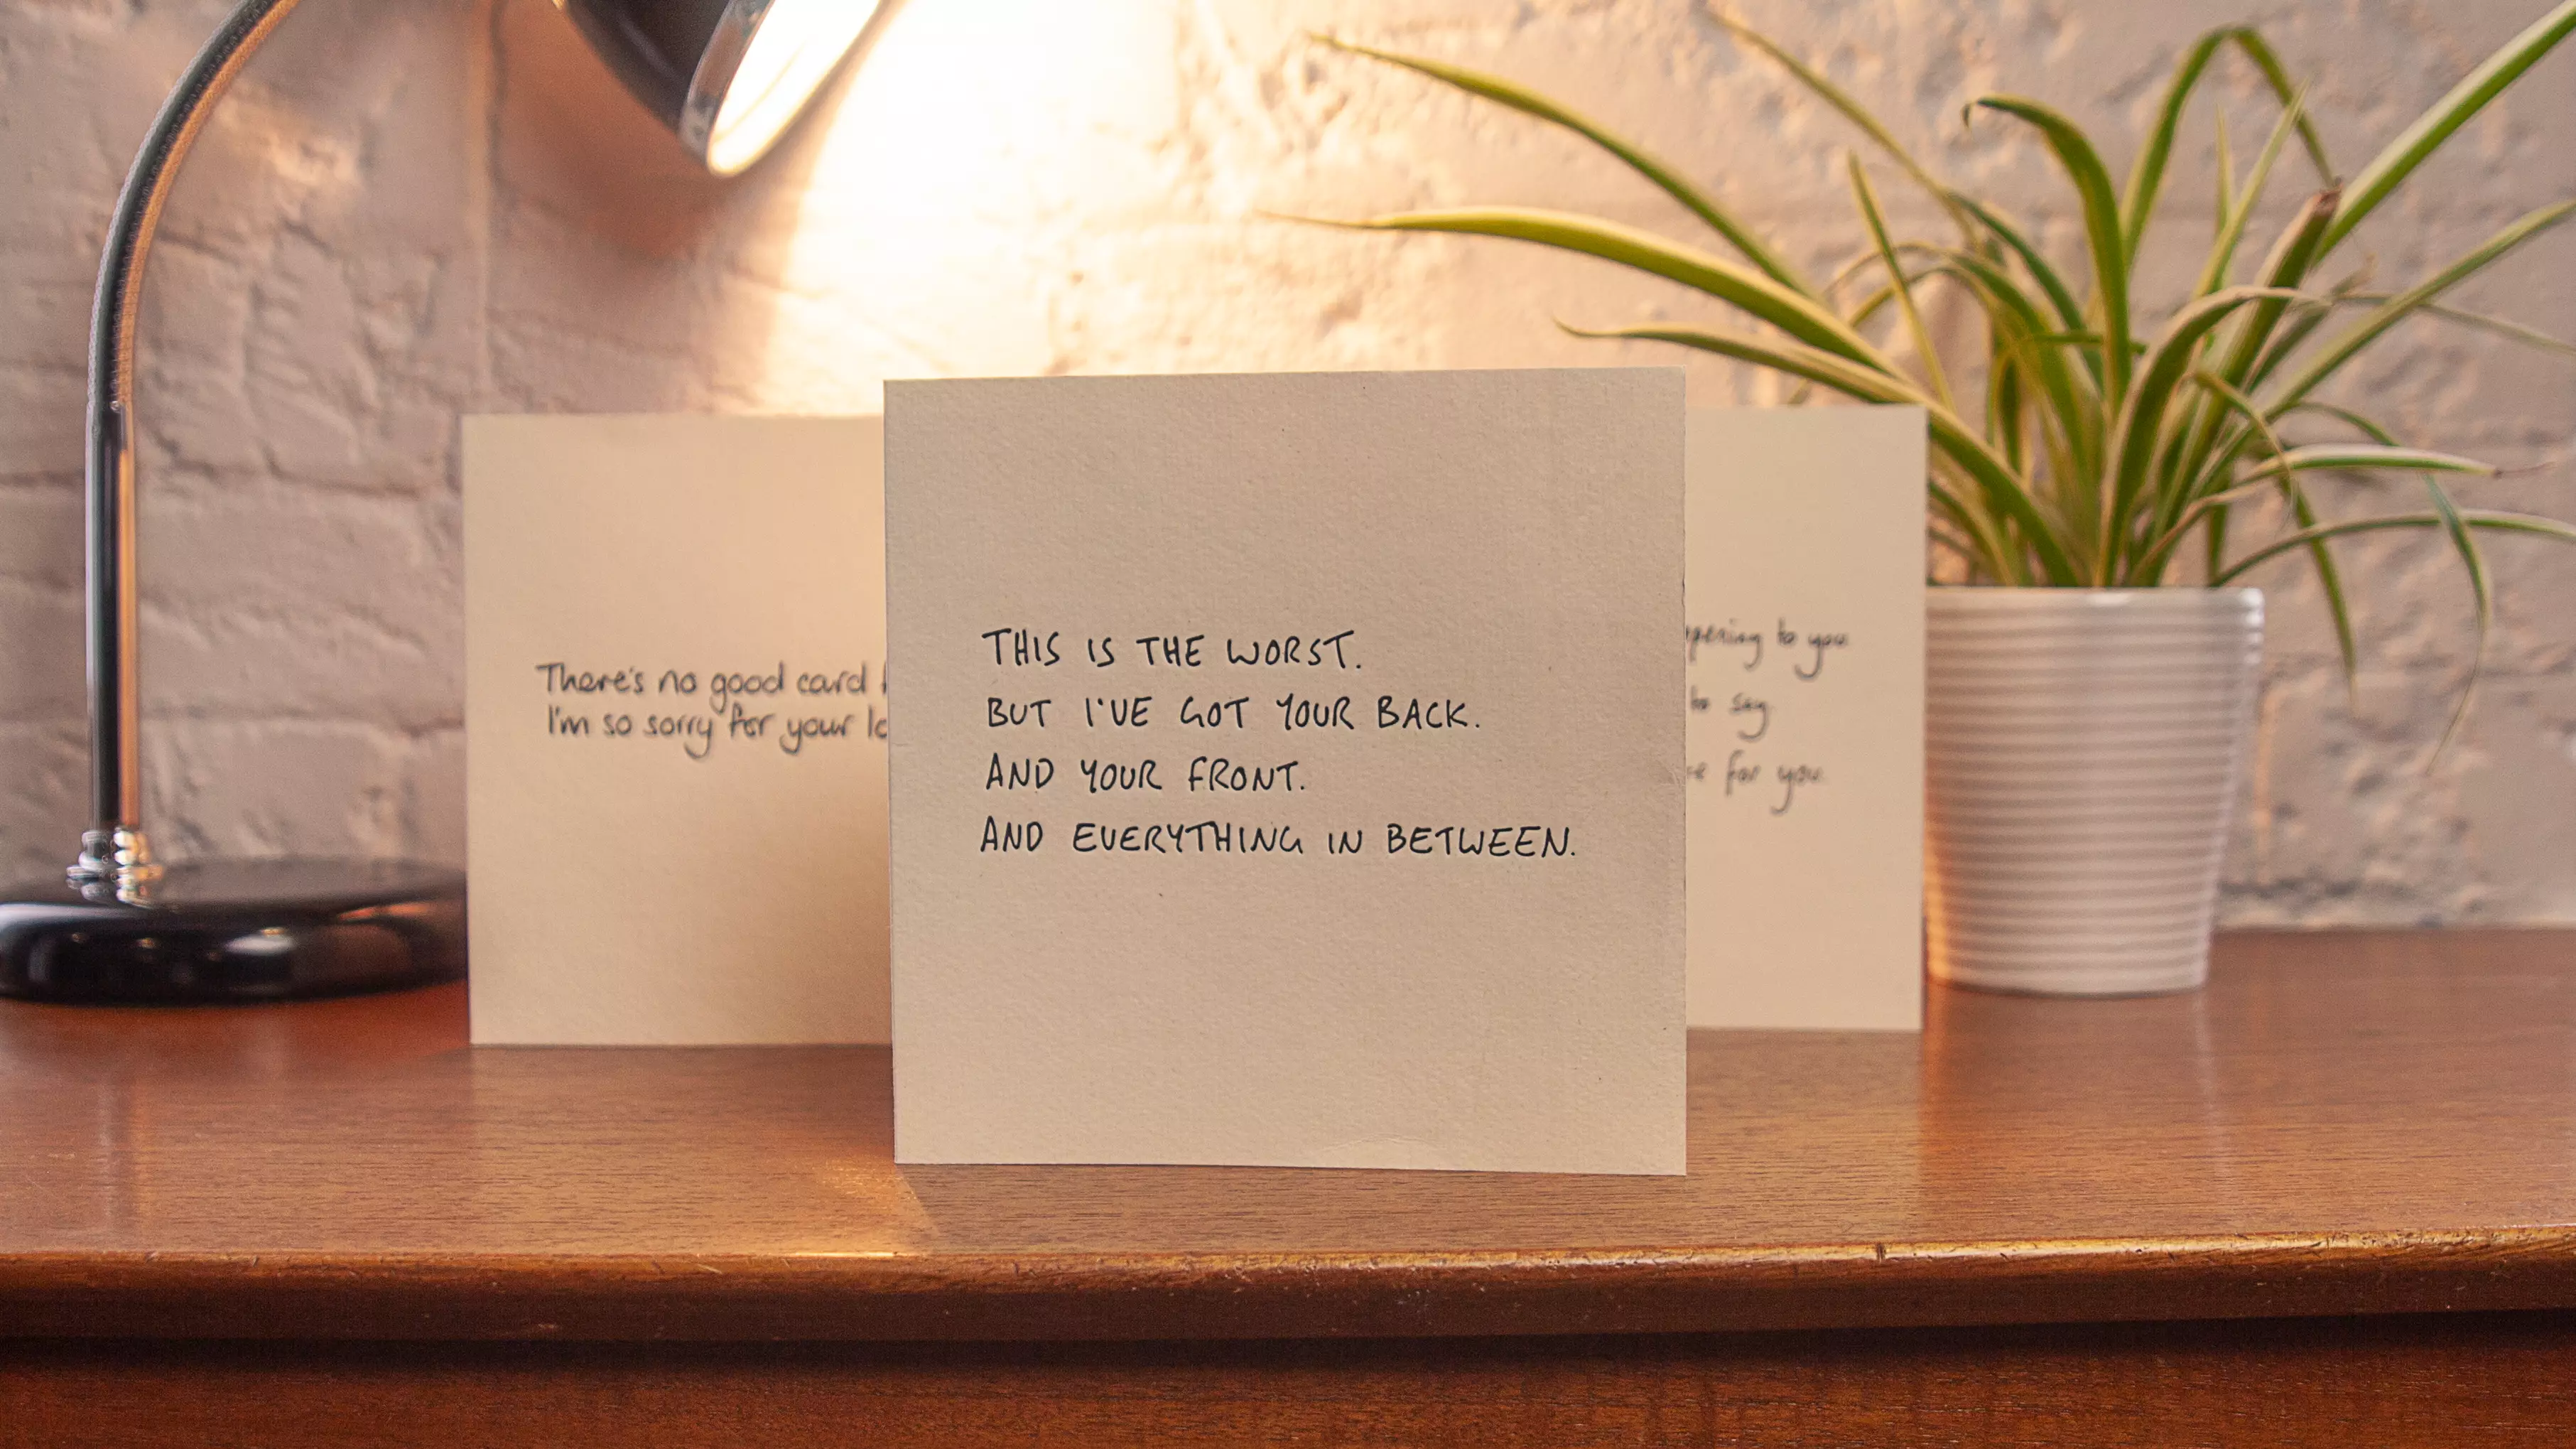 Miscarriage Charity Launches Cards To Recognise Pregnancy Loss